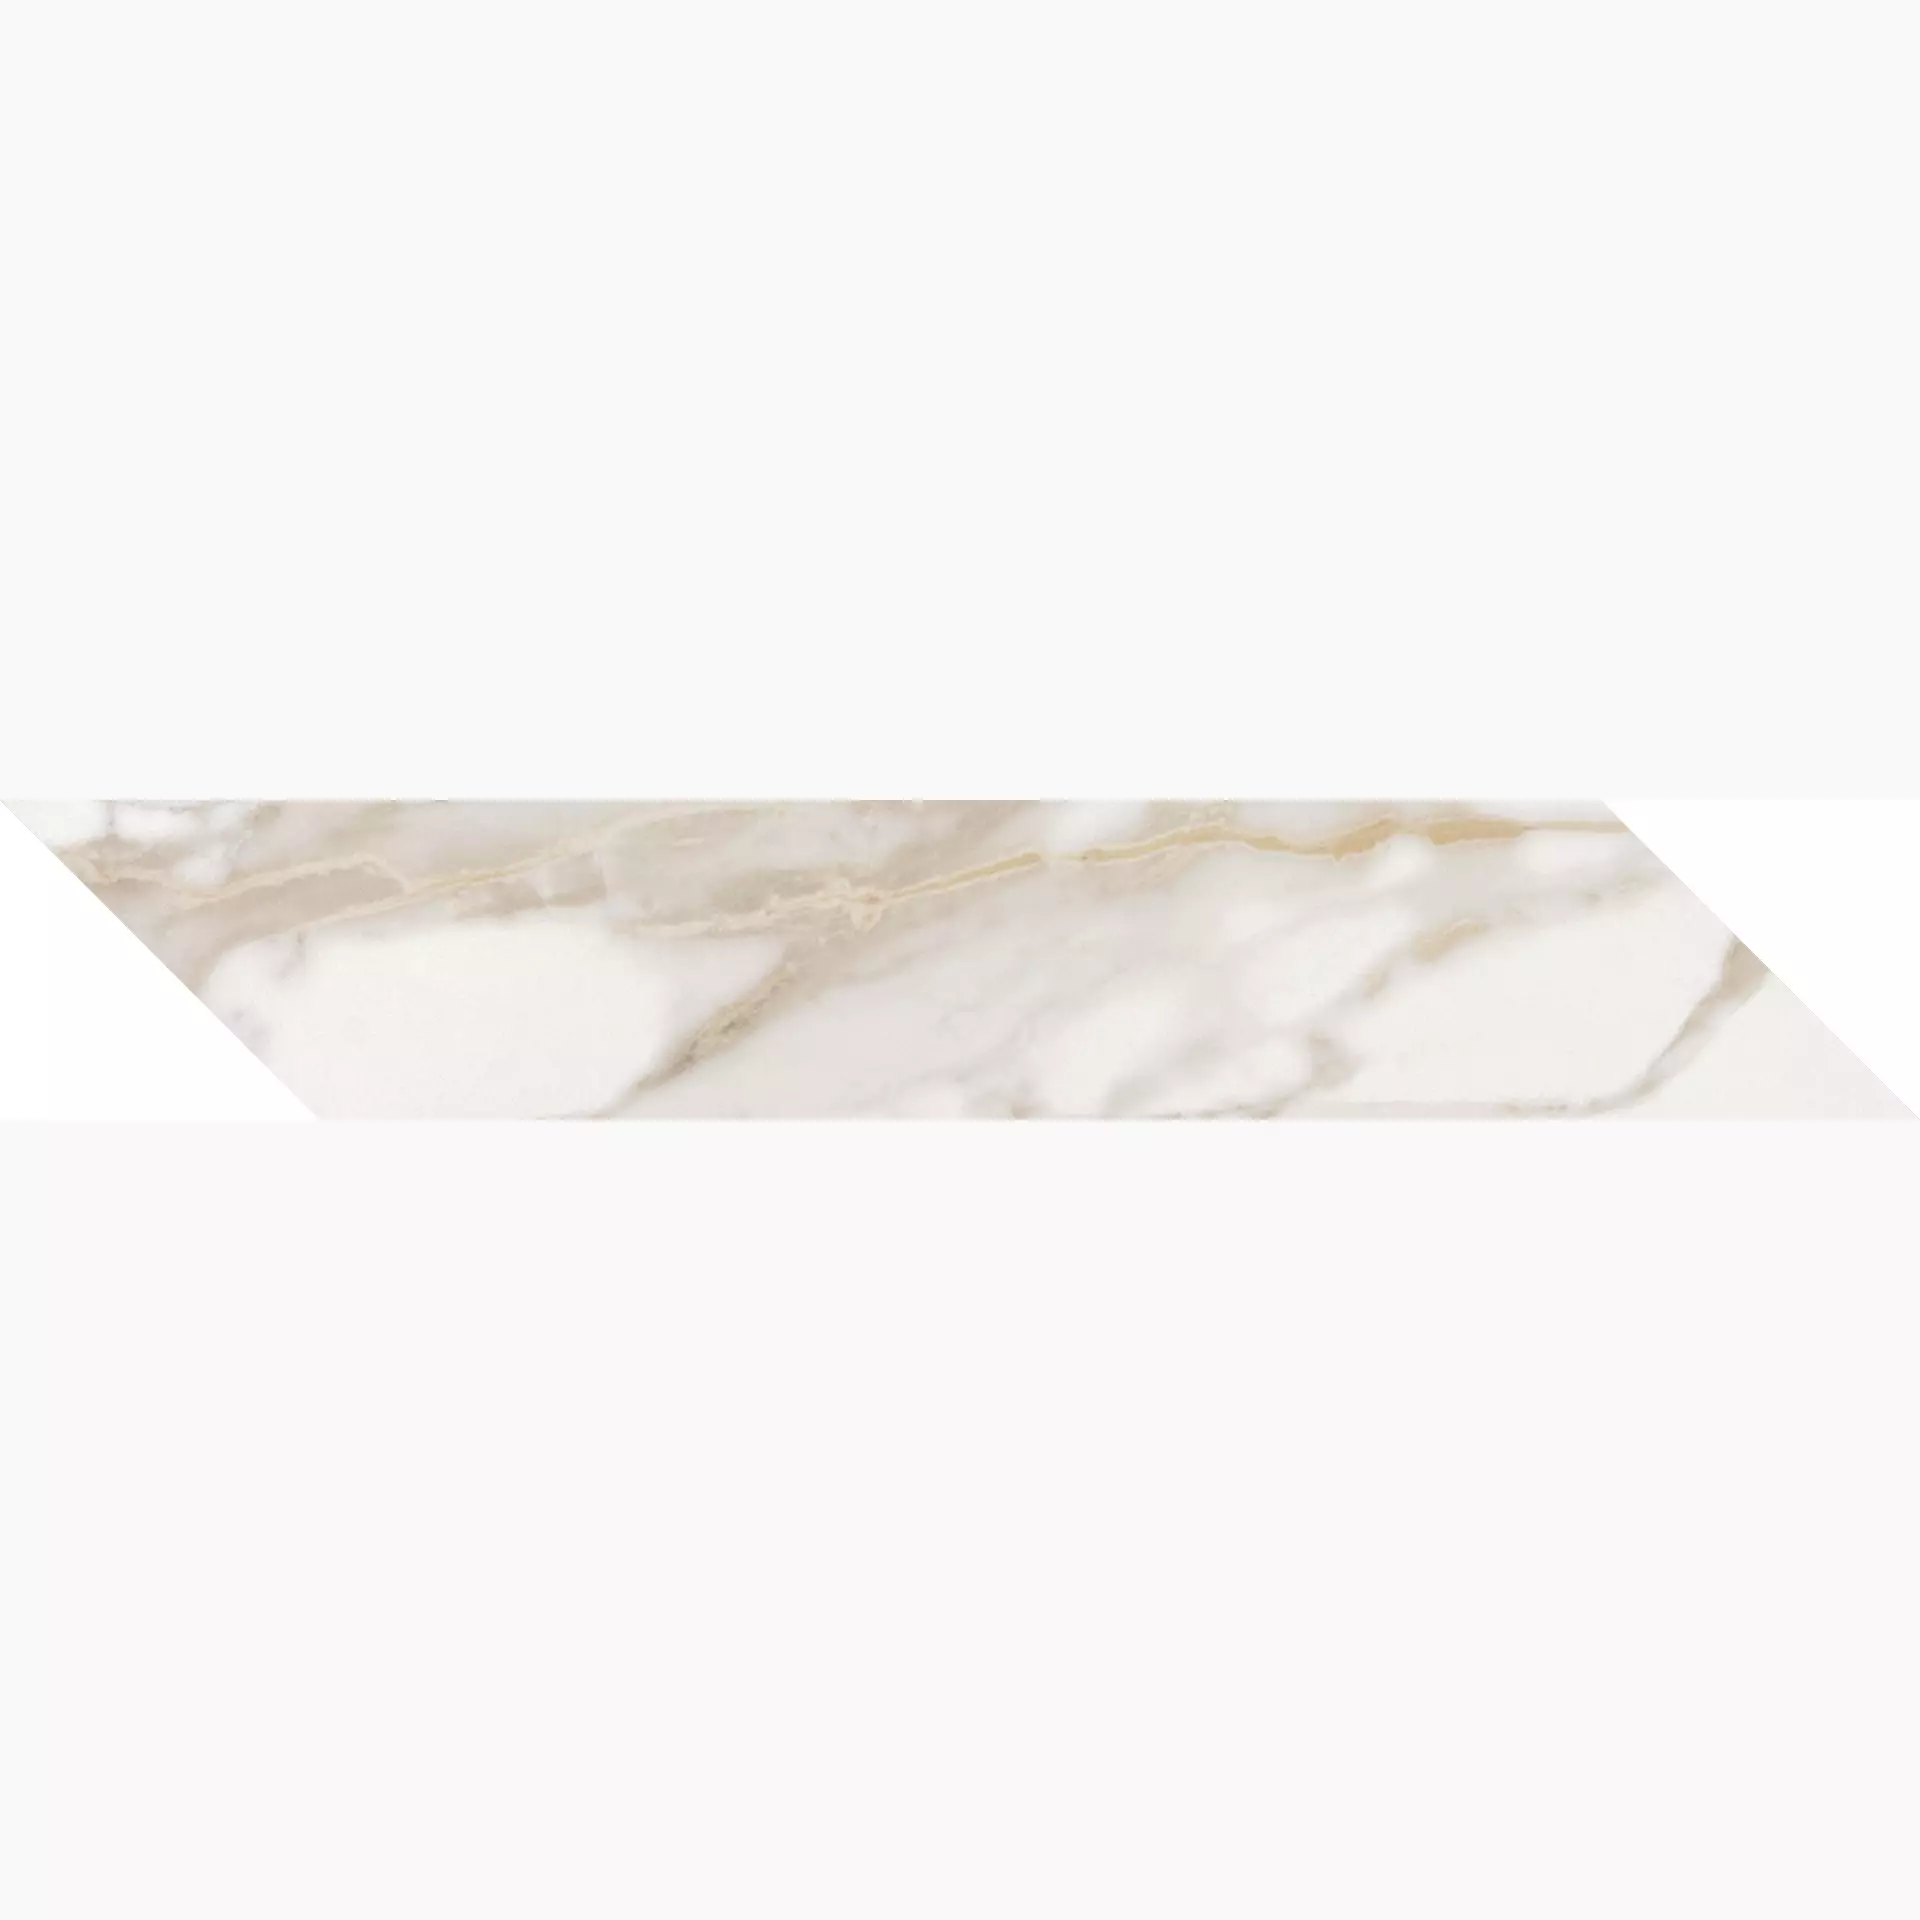 Keope Elements Lux Calacatta Gold Lappato Chevron Left 54384132 10x60cm rectified 9mm